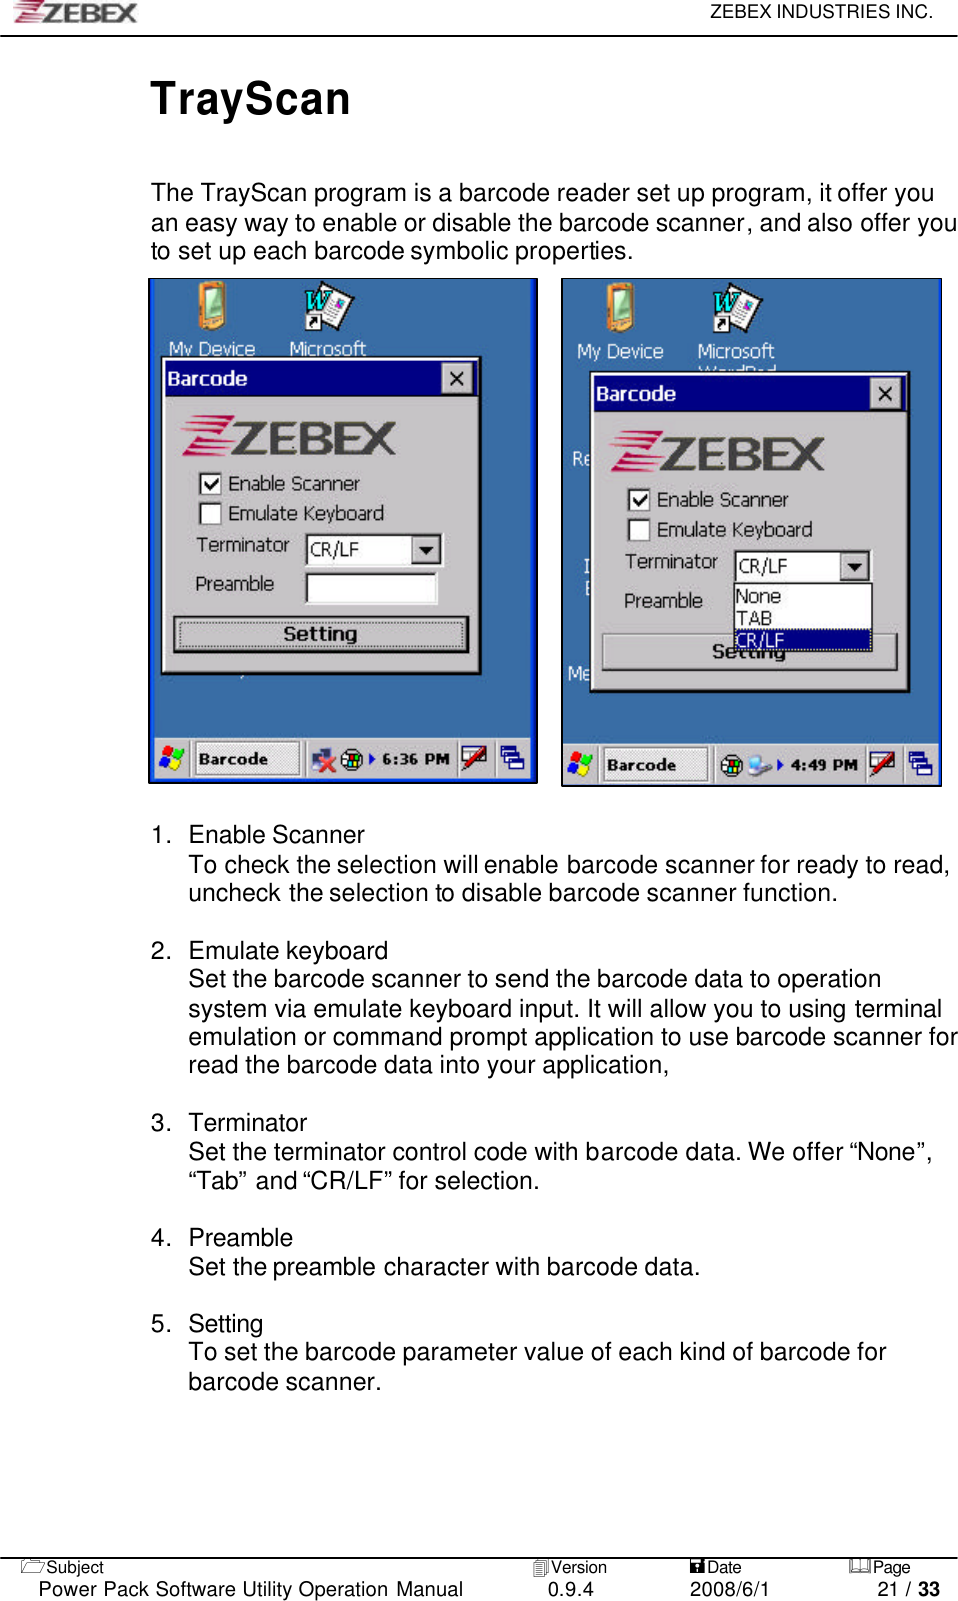     ZEBEX INDUSTRIES INC.   1Subject 4Version           =Date &amp;Page  Power Pack Software Utility Operation Manual 0.9.4    2008/6/1          21 / 33 TrayScan  The TrayScan program is a barcode reader set up program, it offer you an easy way to enable or disable the barcode scanner, and also offer you to set up each barcode symbolic properties.            1. Enable Scanner To check the selection will enable barcode scanner for ready to read, uncheck the selection to disable barcode scanner function.  2. Emulate keyboard Set the barcode scanner to send the barcode data to operation system via emulate keyboard input. It will allow you to using terminal emulation or command prompt application to use barcode scanner for read the barcode data into your application,  3. Terminator Set the terminator control code with barcode data. We offer “None”, “Tab” and “CR/LF” for selection.  4. Preamble Set the preamble character with barcode data.  5. Setting To set the barcode parameter value of each kind of barcode for barcode scanner.    